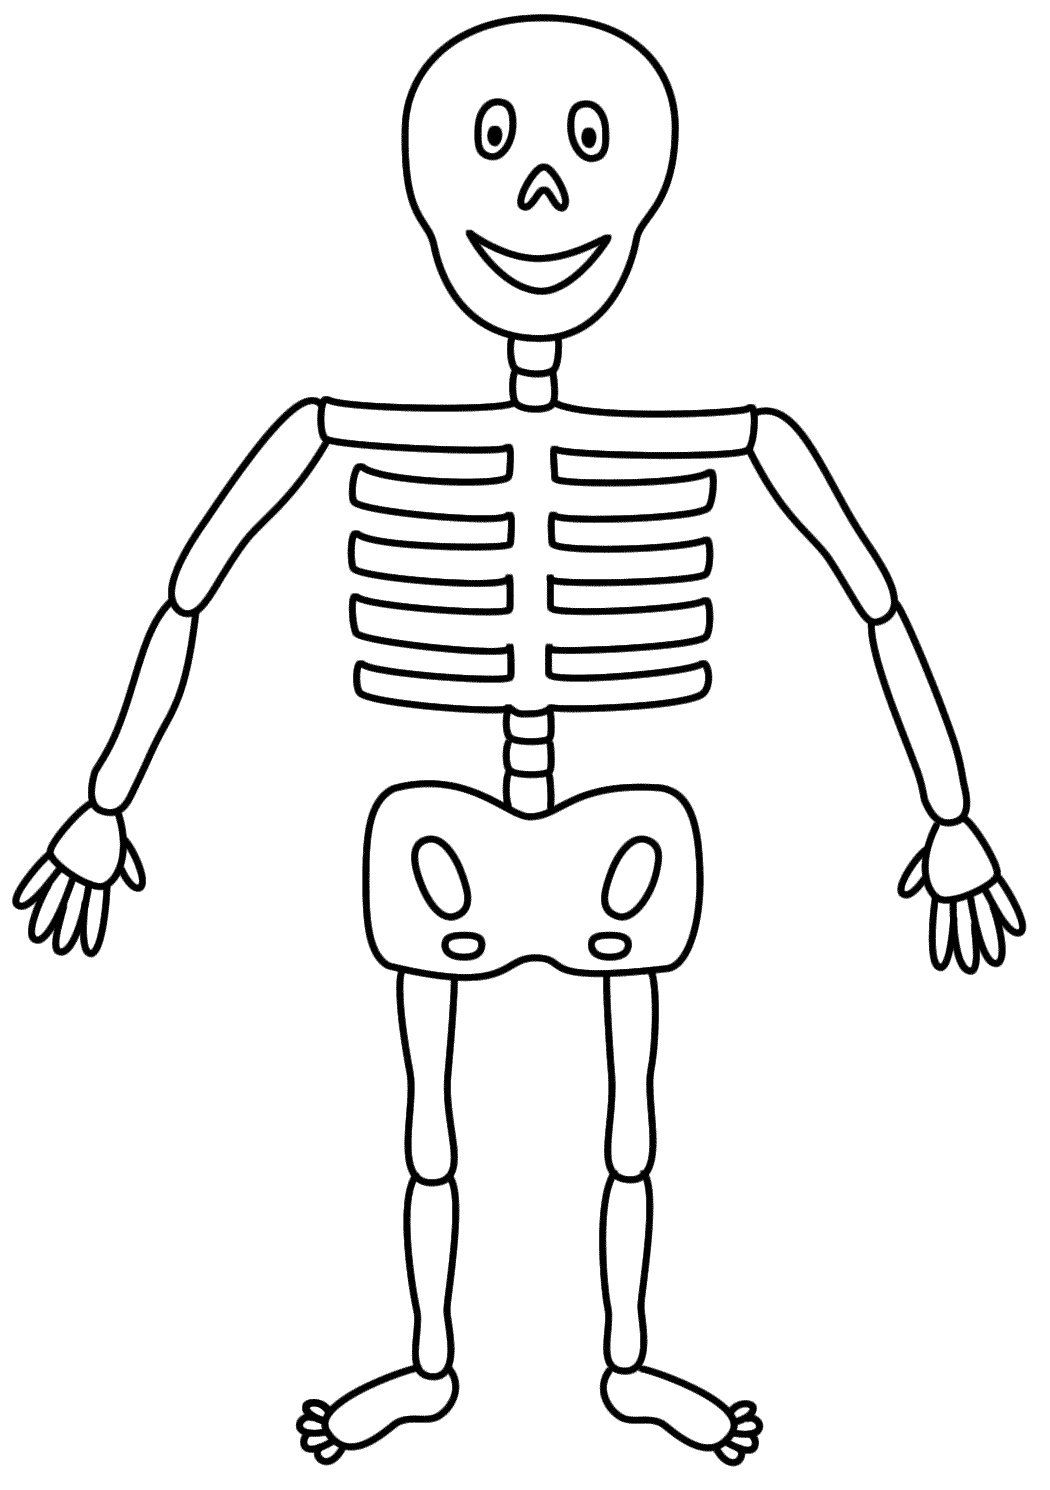 picture of skeleton for kids - copy only one half and use for ...